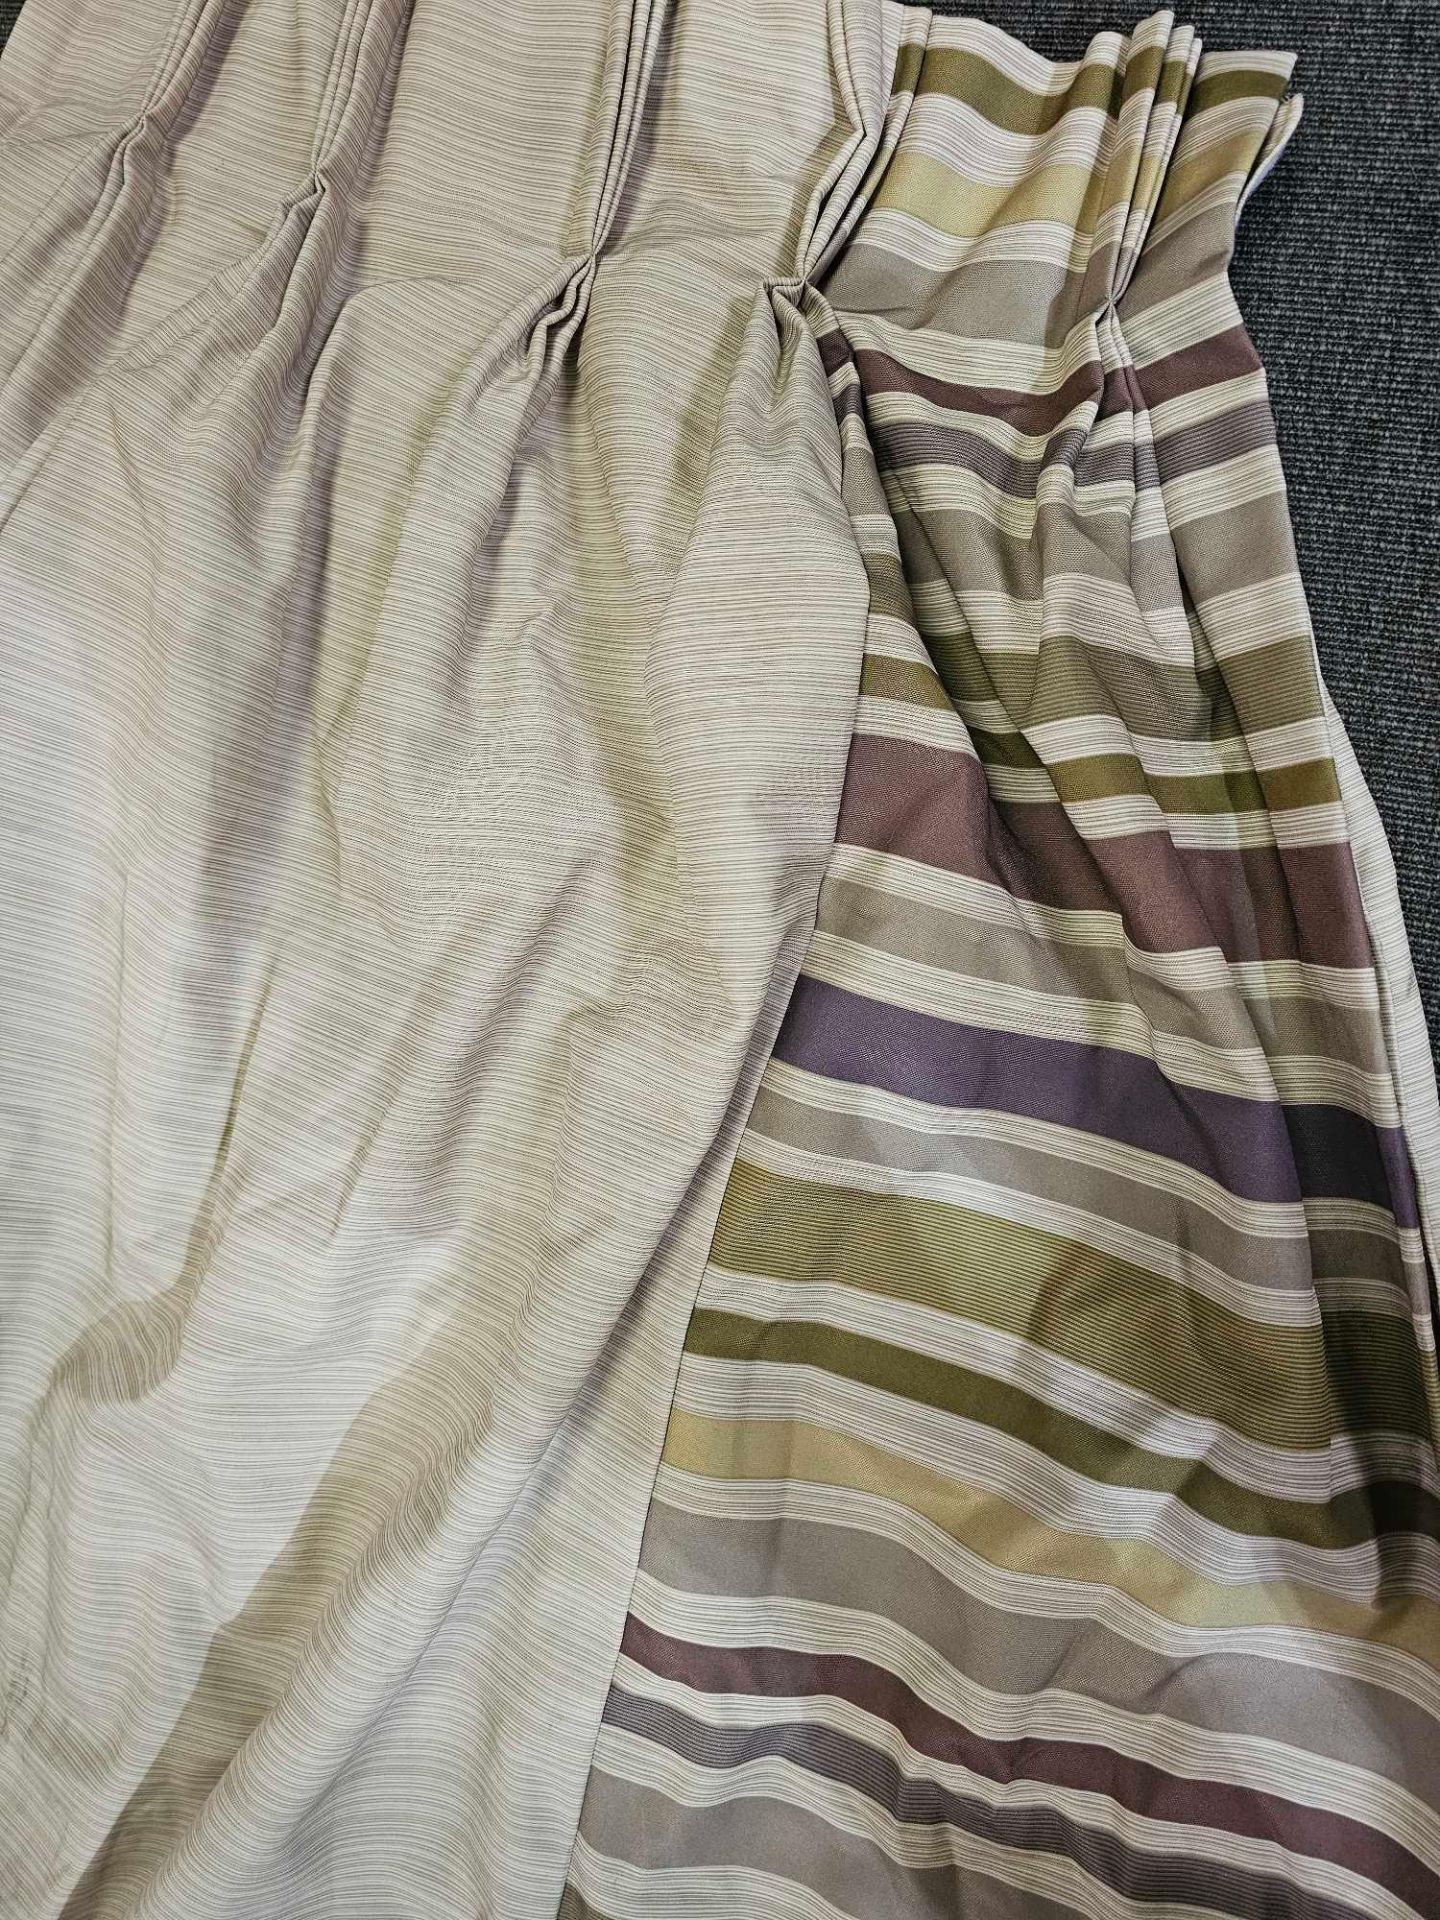 A Pair Of Curtain Cream Striped Edge Purple/Green/Beige/Brown Size 284 x 250cm ( Ref Red 154) - Image 2 of 2